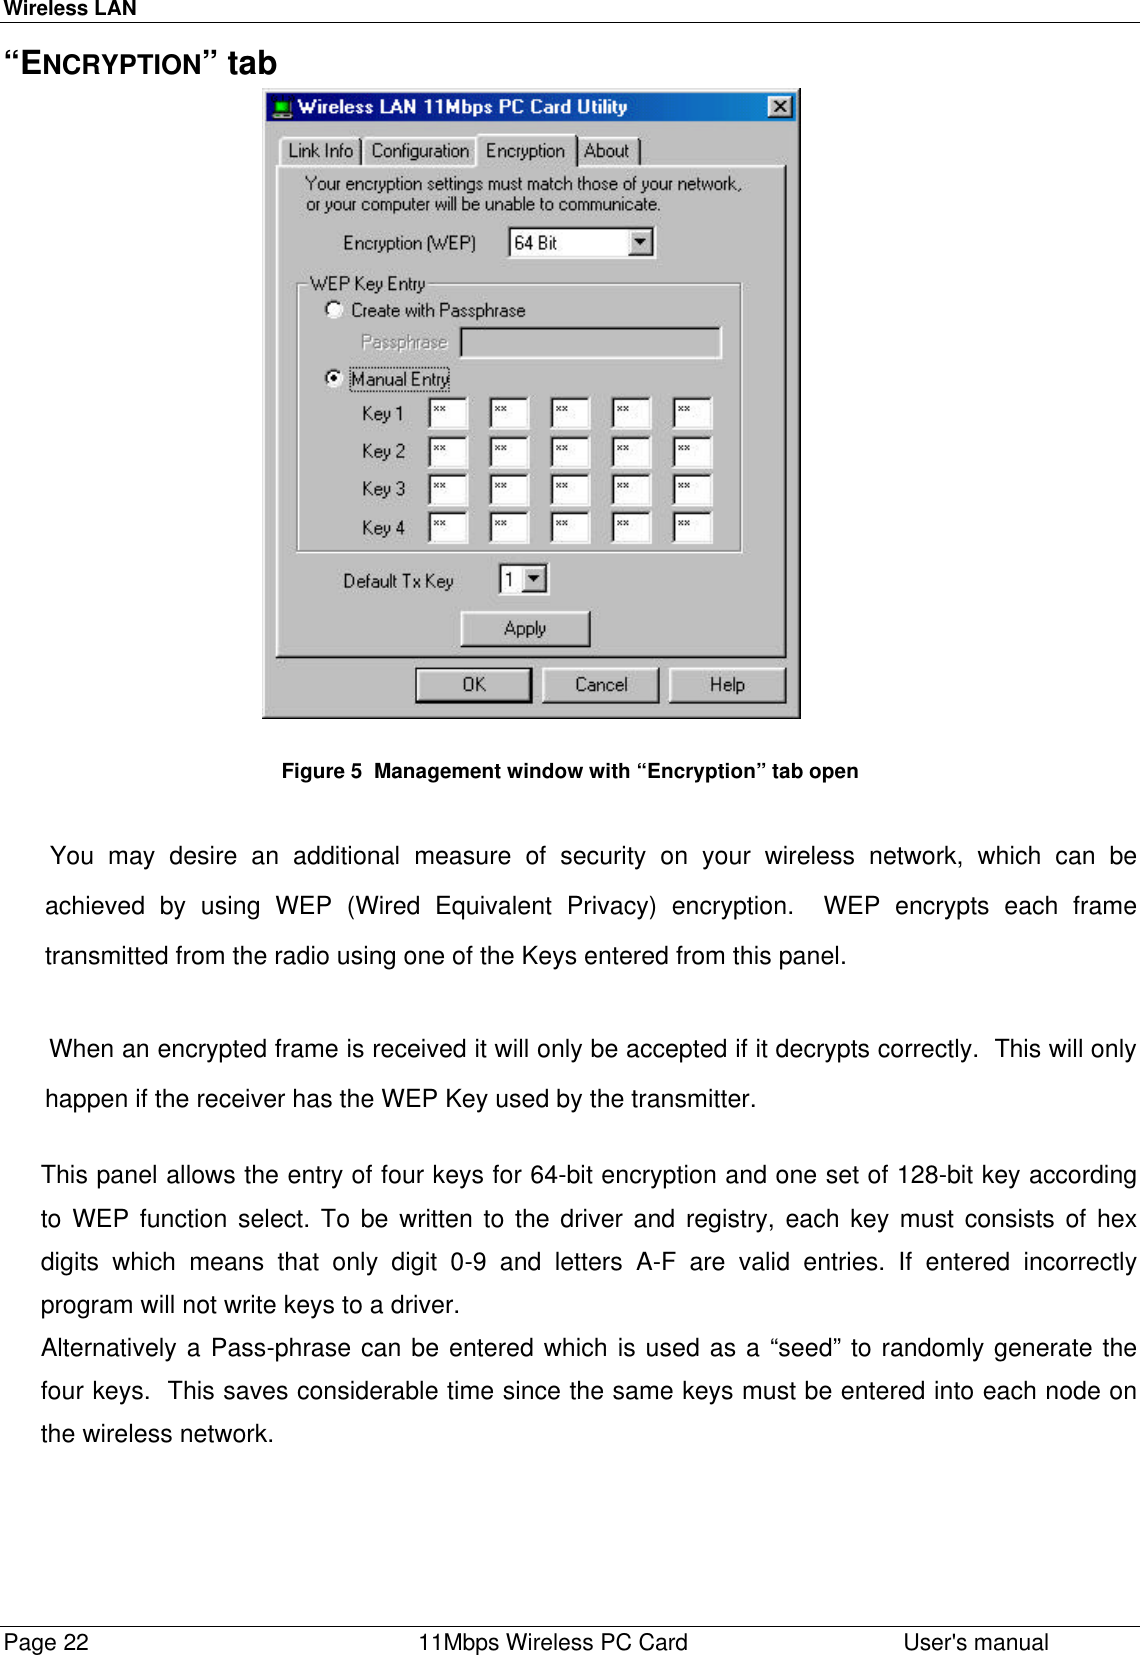 Wireless LAN Page 22    11Mbps Wireless PC Card    User&apos;s manual “ENCRYPTION” tab                                                            Figure 5  Management window with “Encryption” tab open   You may desire an additional measure of security on your wireless network, which can be achieved by using WEP (Wired Equivalent Privacy) encryption.  WEP encrypts each frame transmitted from the radio using one of the Keys entered from this panel.  When an encrypted frame is received it will only be accepted if it decrypts correctly.  This will only happen if the receiver has the WEP Key used by the transmitter.  This panel allows the entry of four keys for 64-bit encryption and one set of 128-bit key according to WEP function select. To be written to the driver and registry, each key must consists of hex digits which means that only digit 0-9 and letters A-F are valid entries. If entered incorrectly program will not write keys to a driver. Alternatively a Pass-phrase can be entered which is used as a “seed” to randomly generate the four keys.  This saves considerable time since the same keys must be entered into each node on the wireless network.  